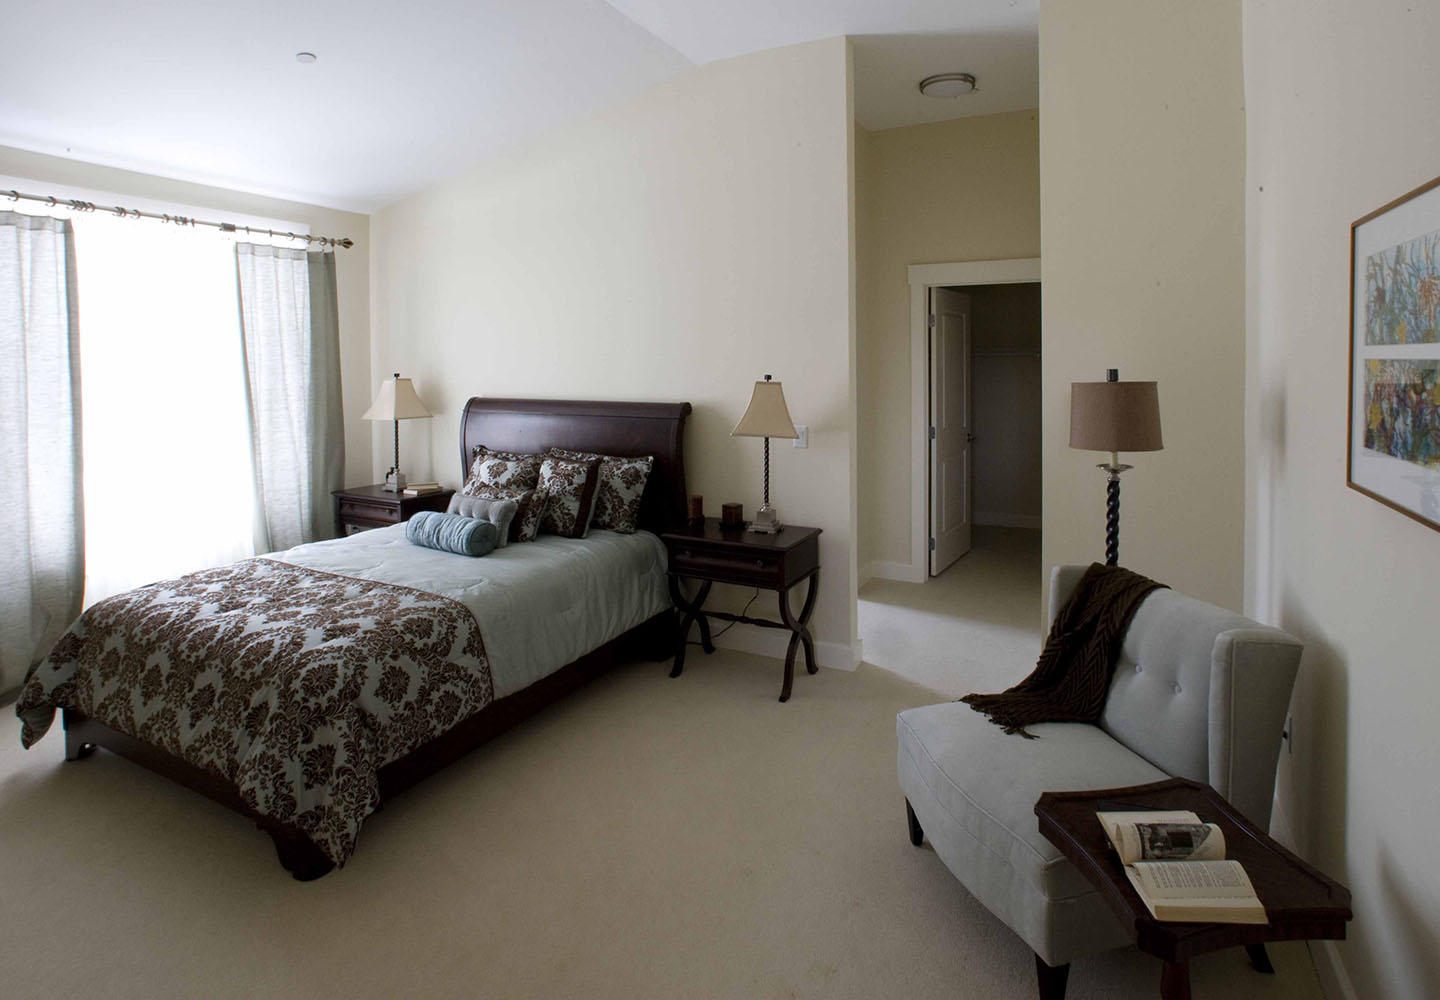 A sunny bedroom with additional seating is typical of NewBridge on the Charles apartments.